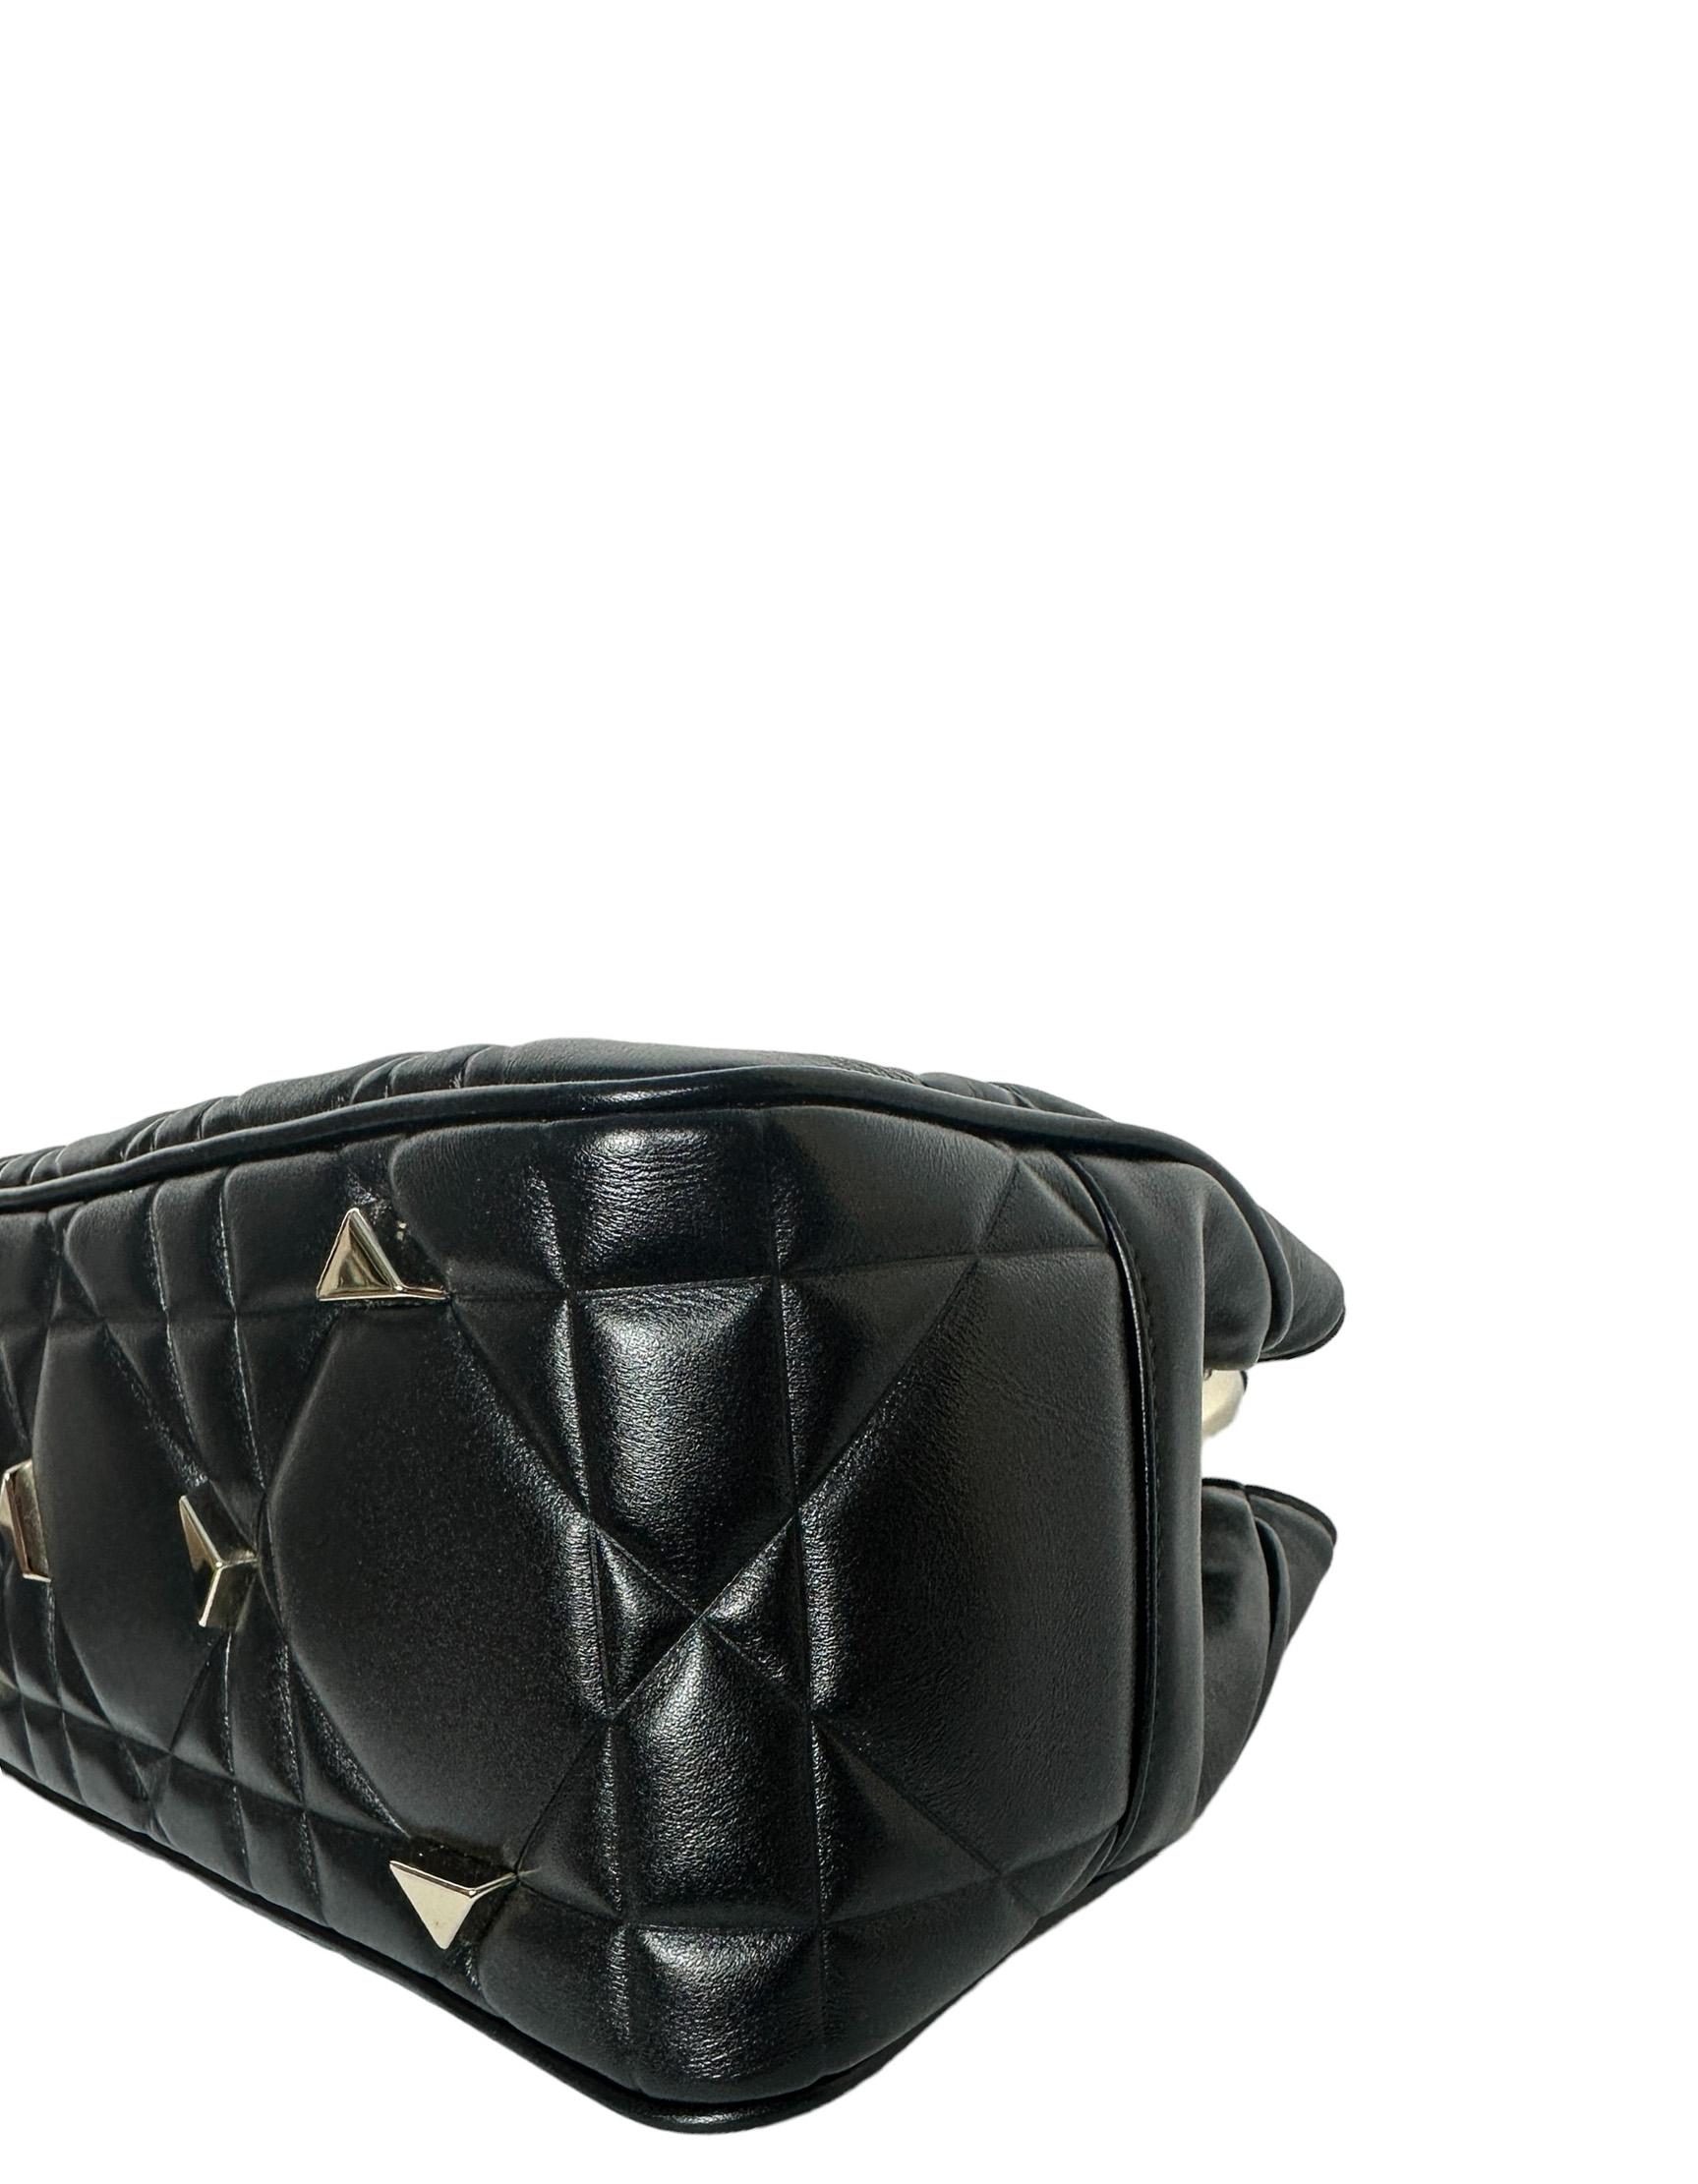 Women's Christian Dior Black Leather Cannage Quilted The Lady 95.22 Bag rt. $7200 For Sale